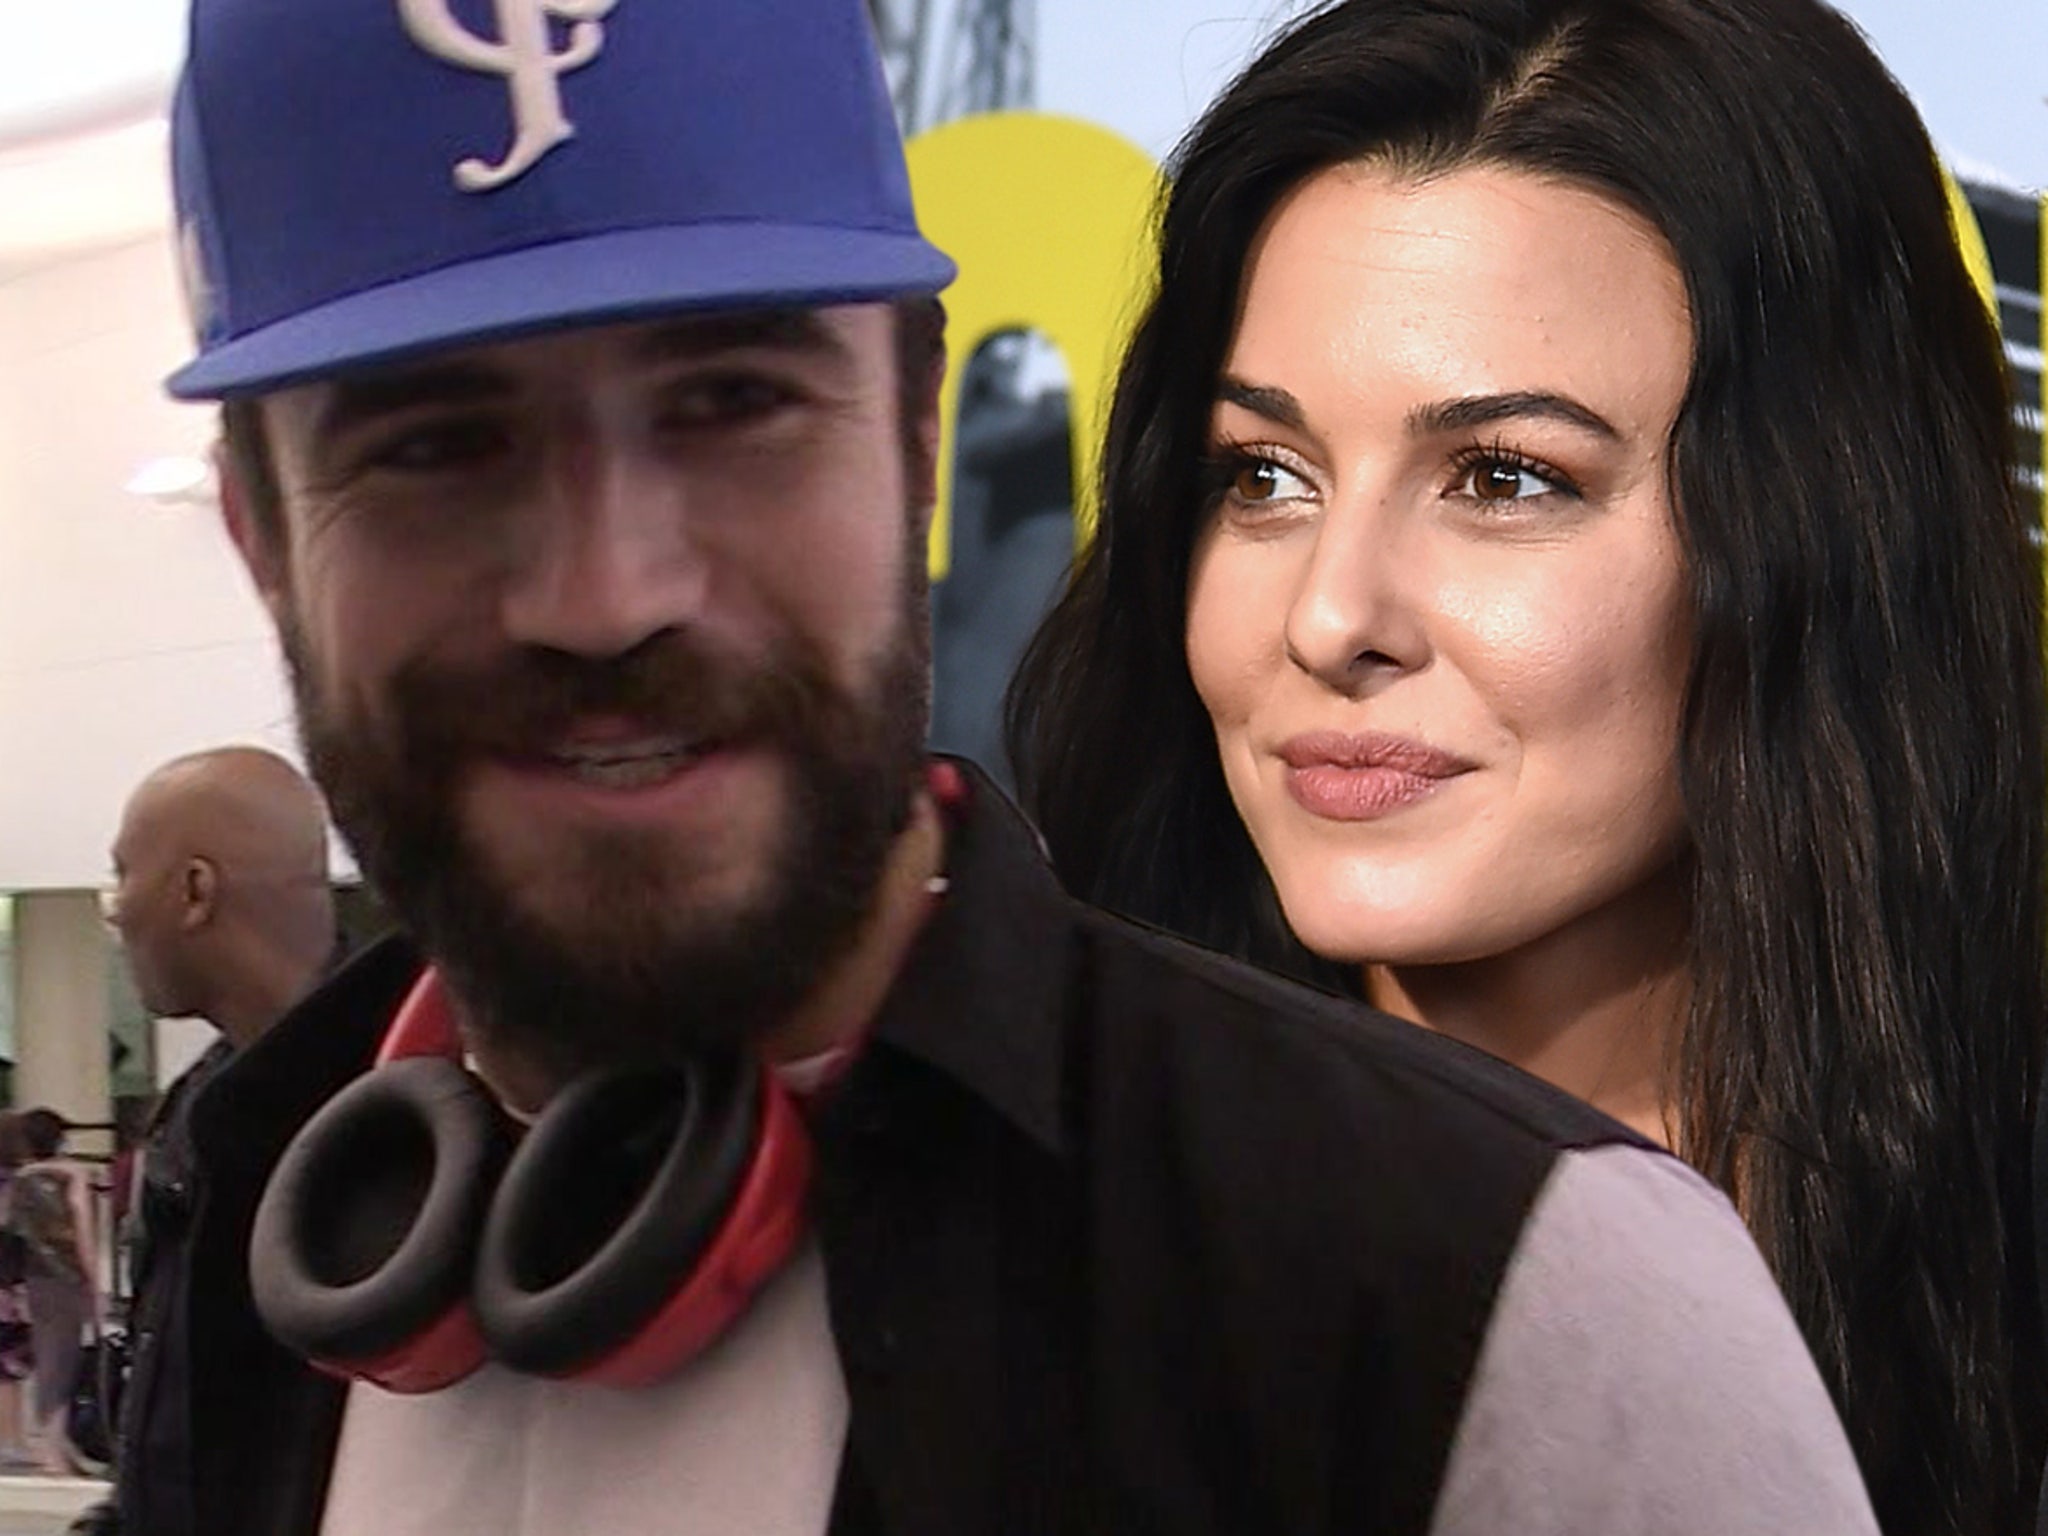 Sam Hunt Divorce from Pregnant Wife Called Off